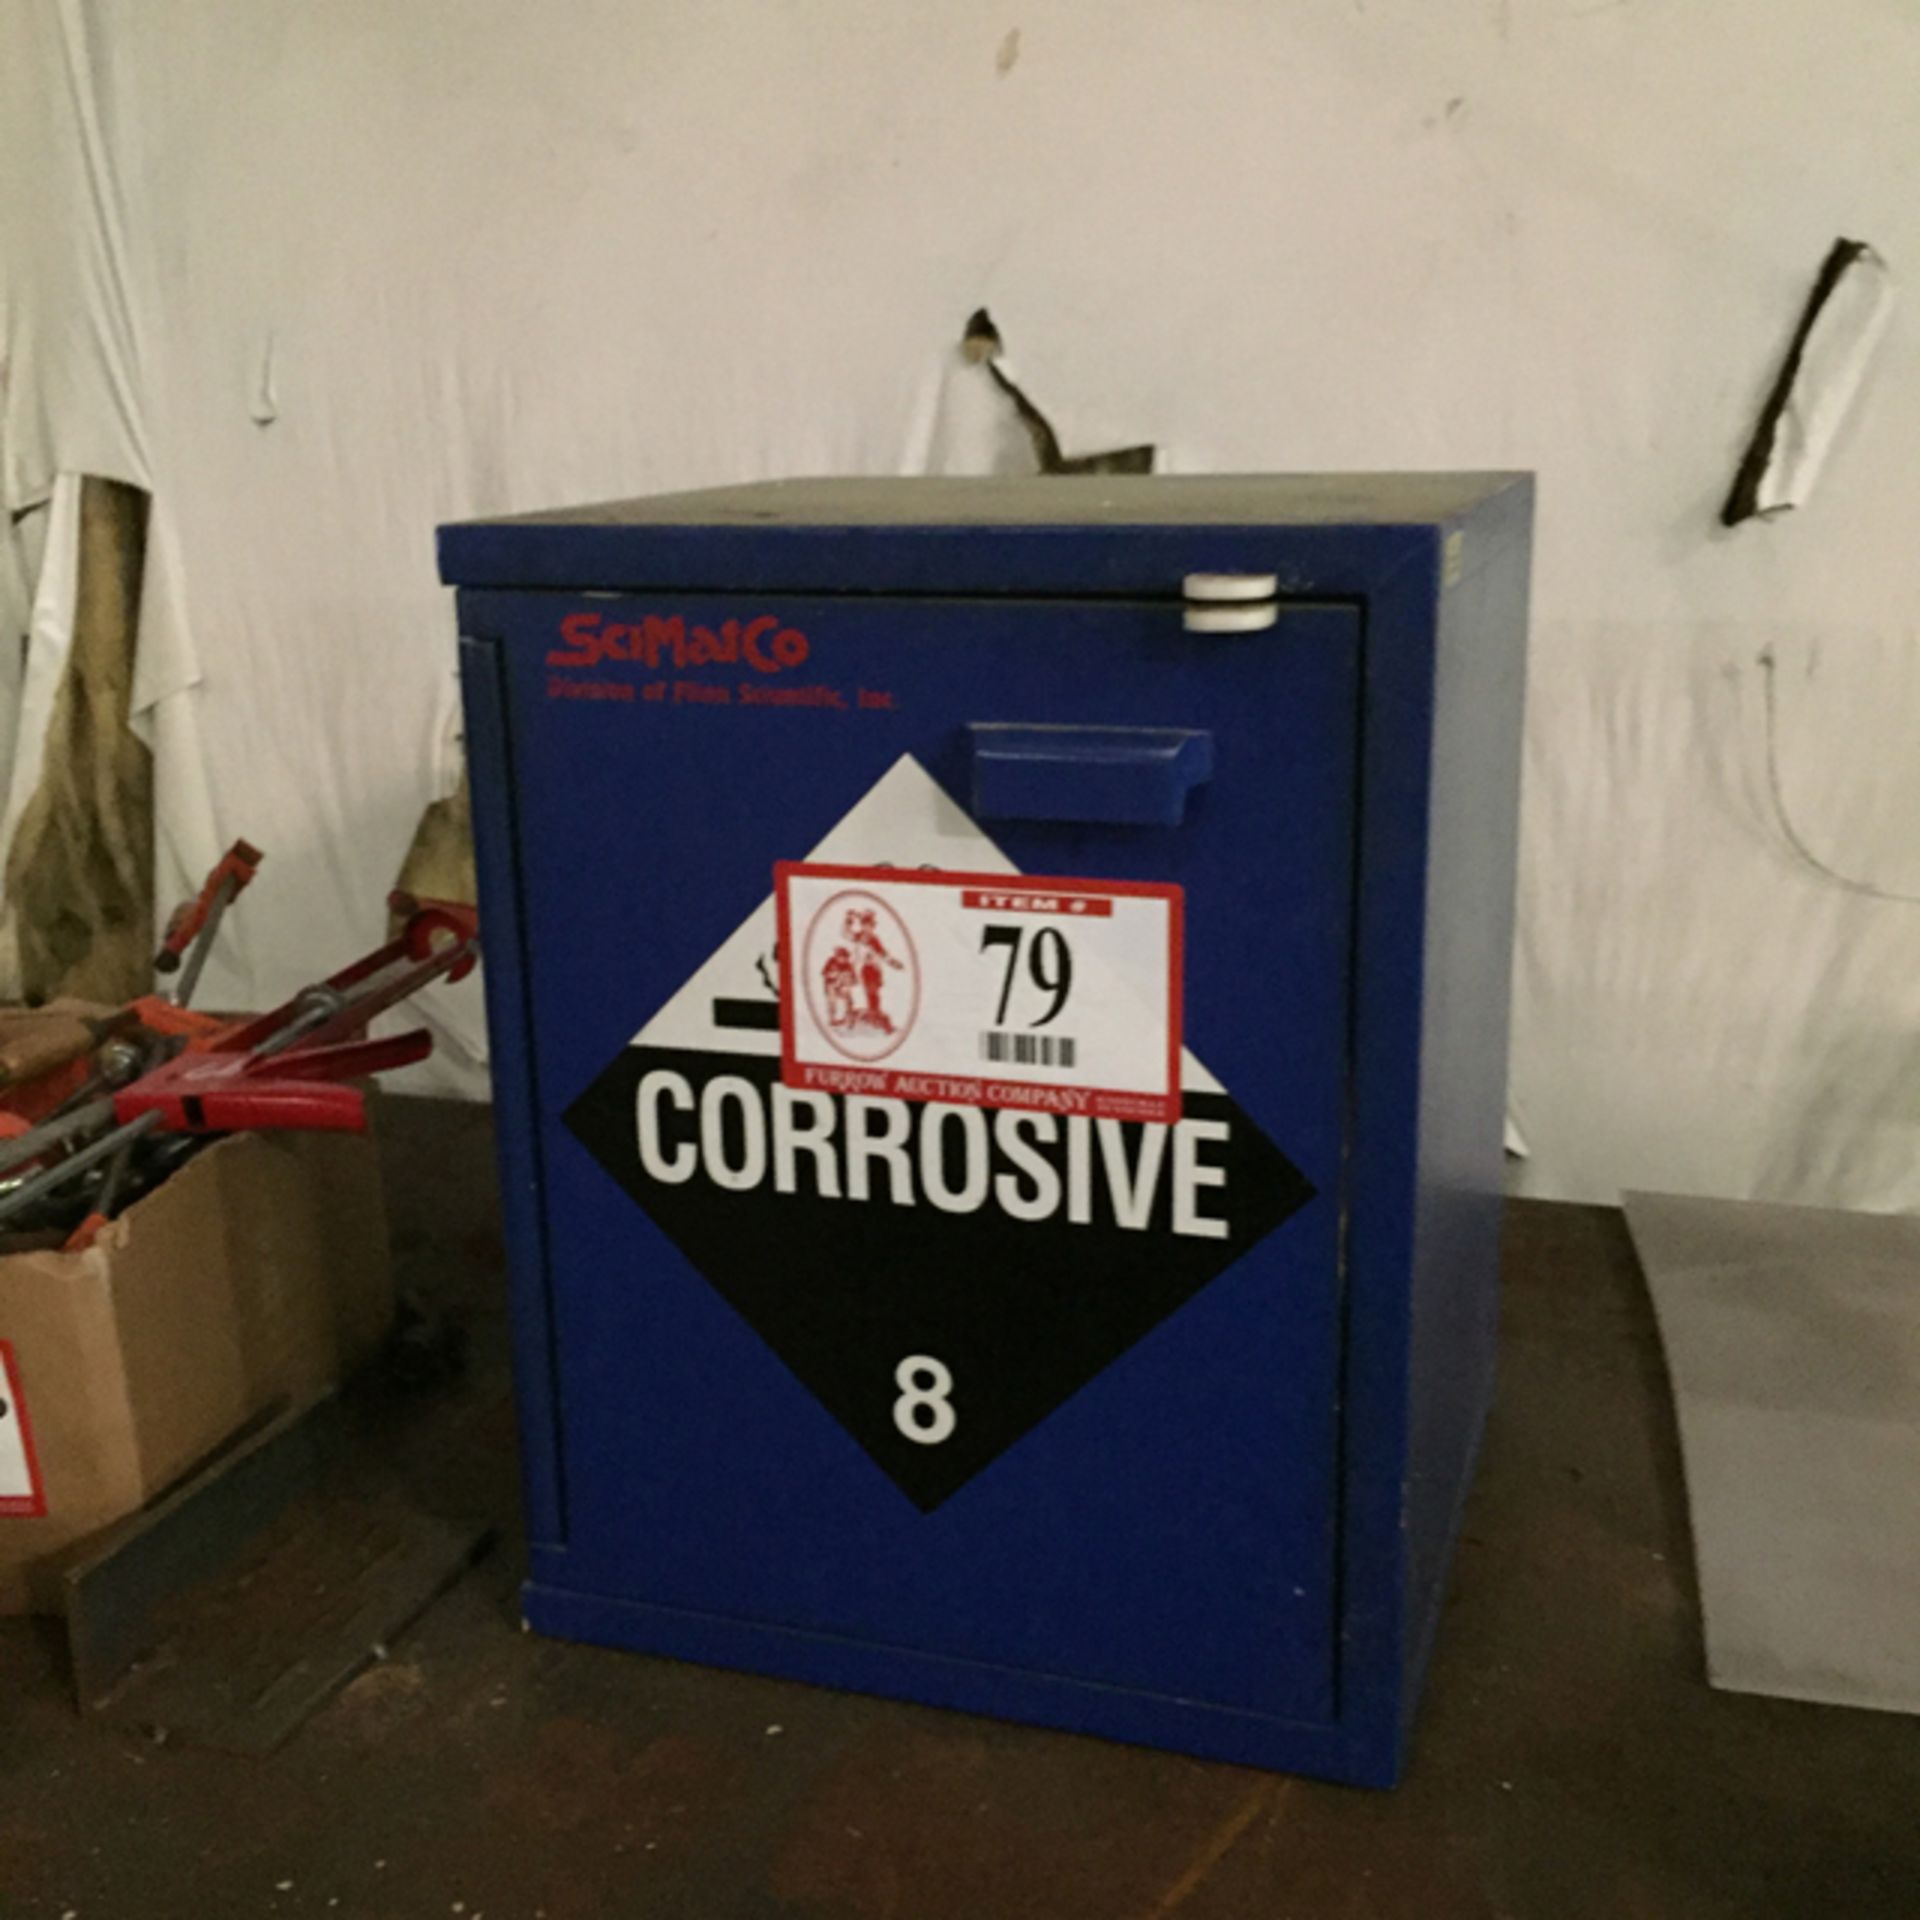 24" X 16" X 16" Corrosives Cabinet, W/Contents, Misc Chemicals - Image 2 of 2